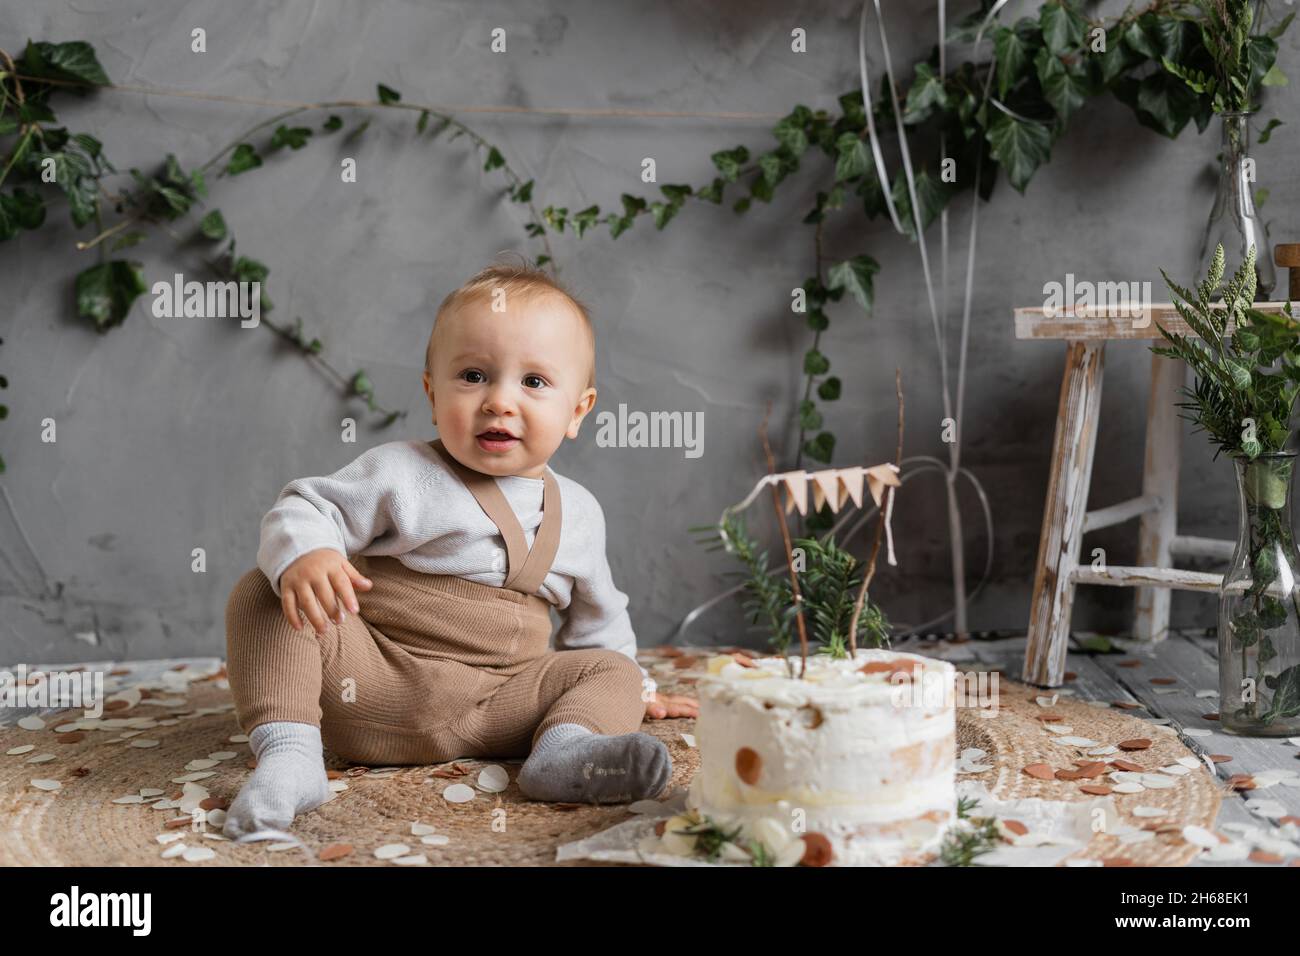 holiday baby's first birthday, boy with a delicious cake sitting on the floor, birthday in rustic style, natural photo zone, happy one year old. Stock Photo